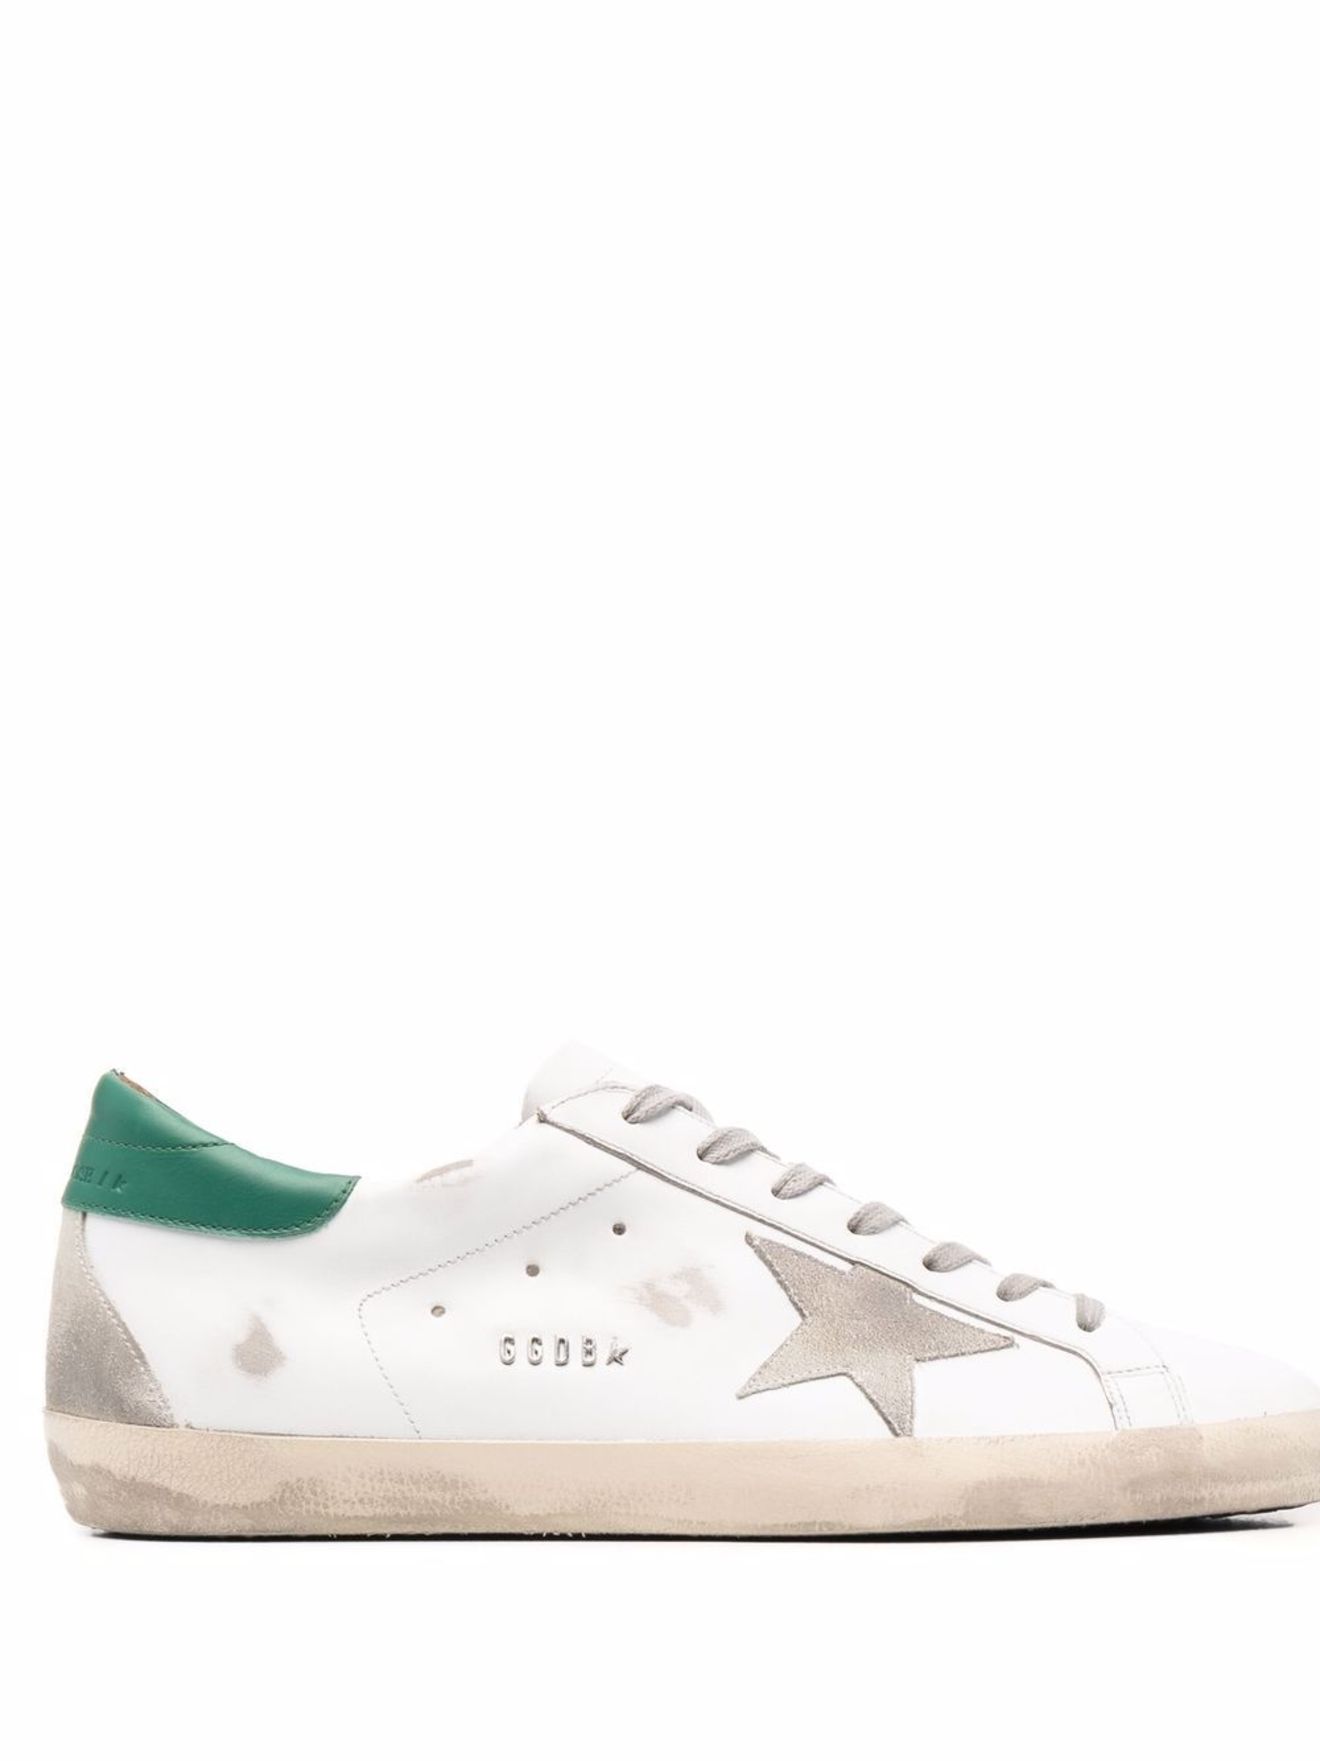 Golden Goose Super-Star low-top sneakers white | MODES